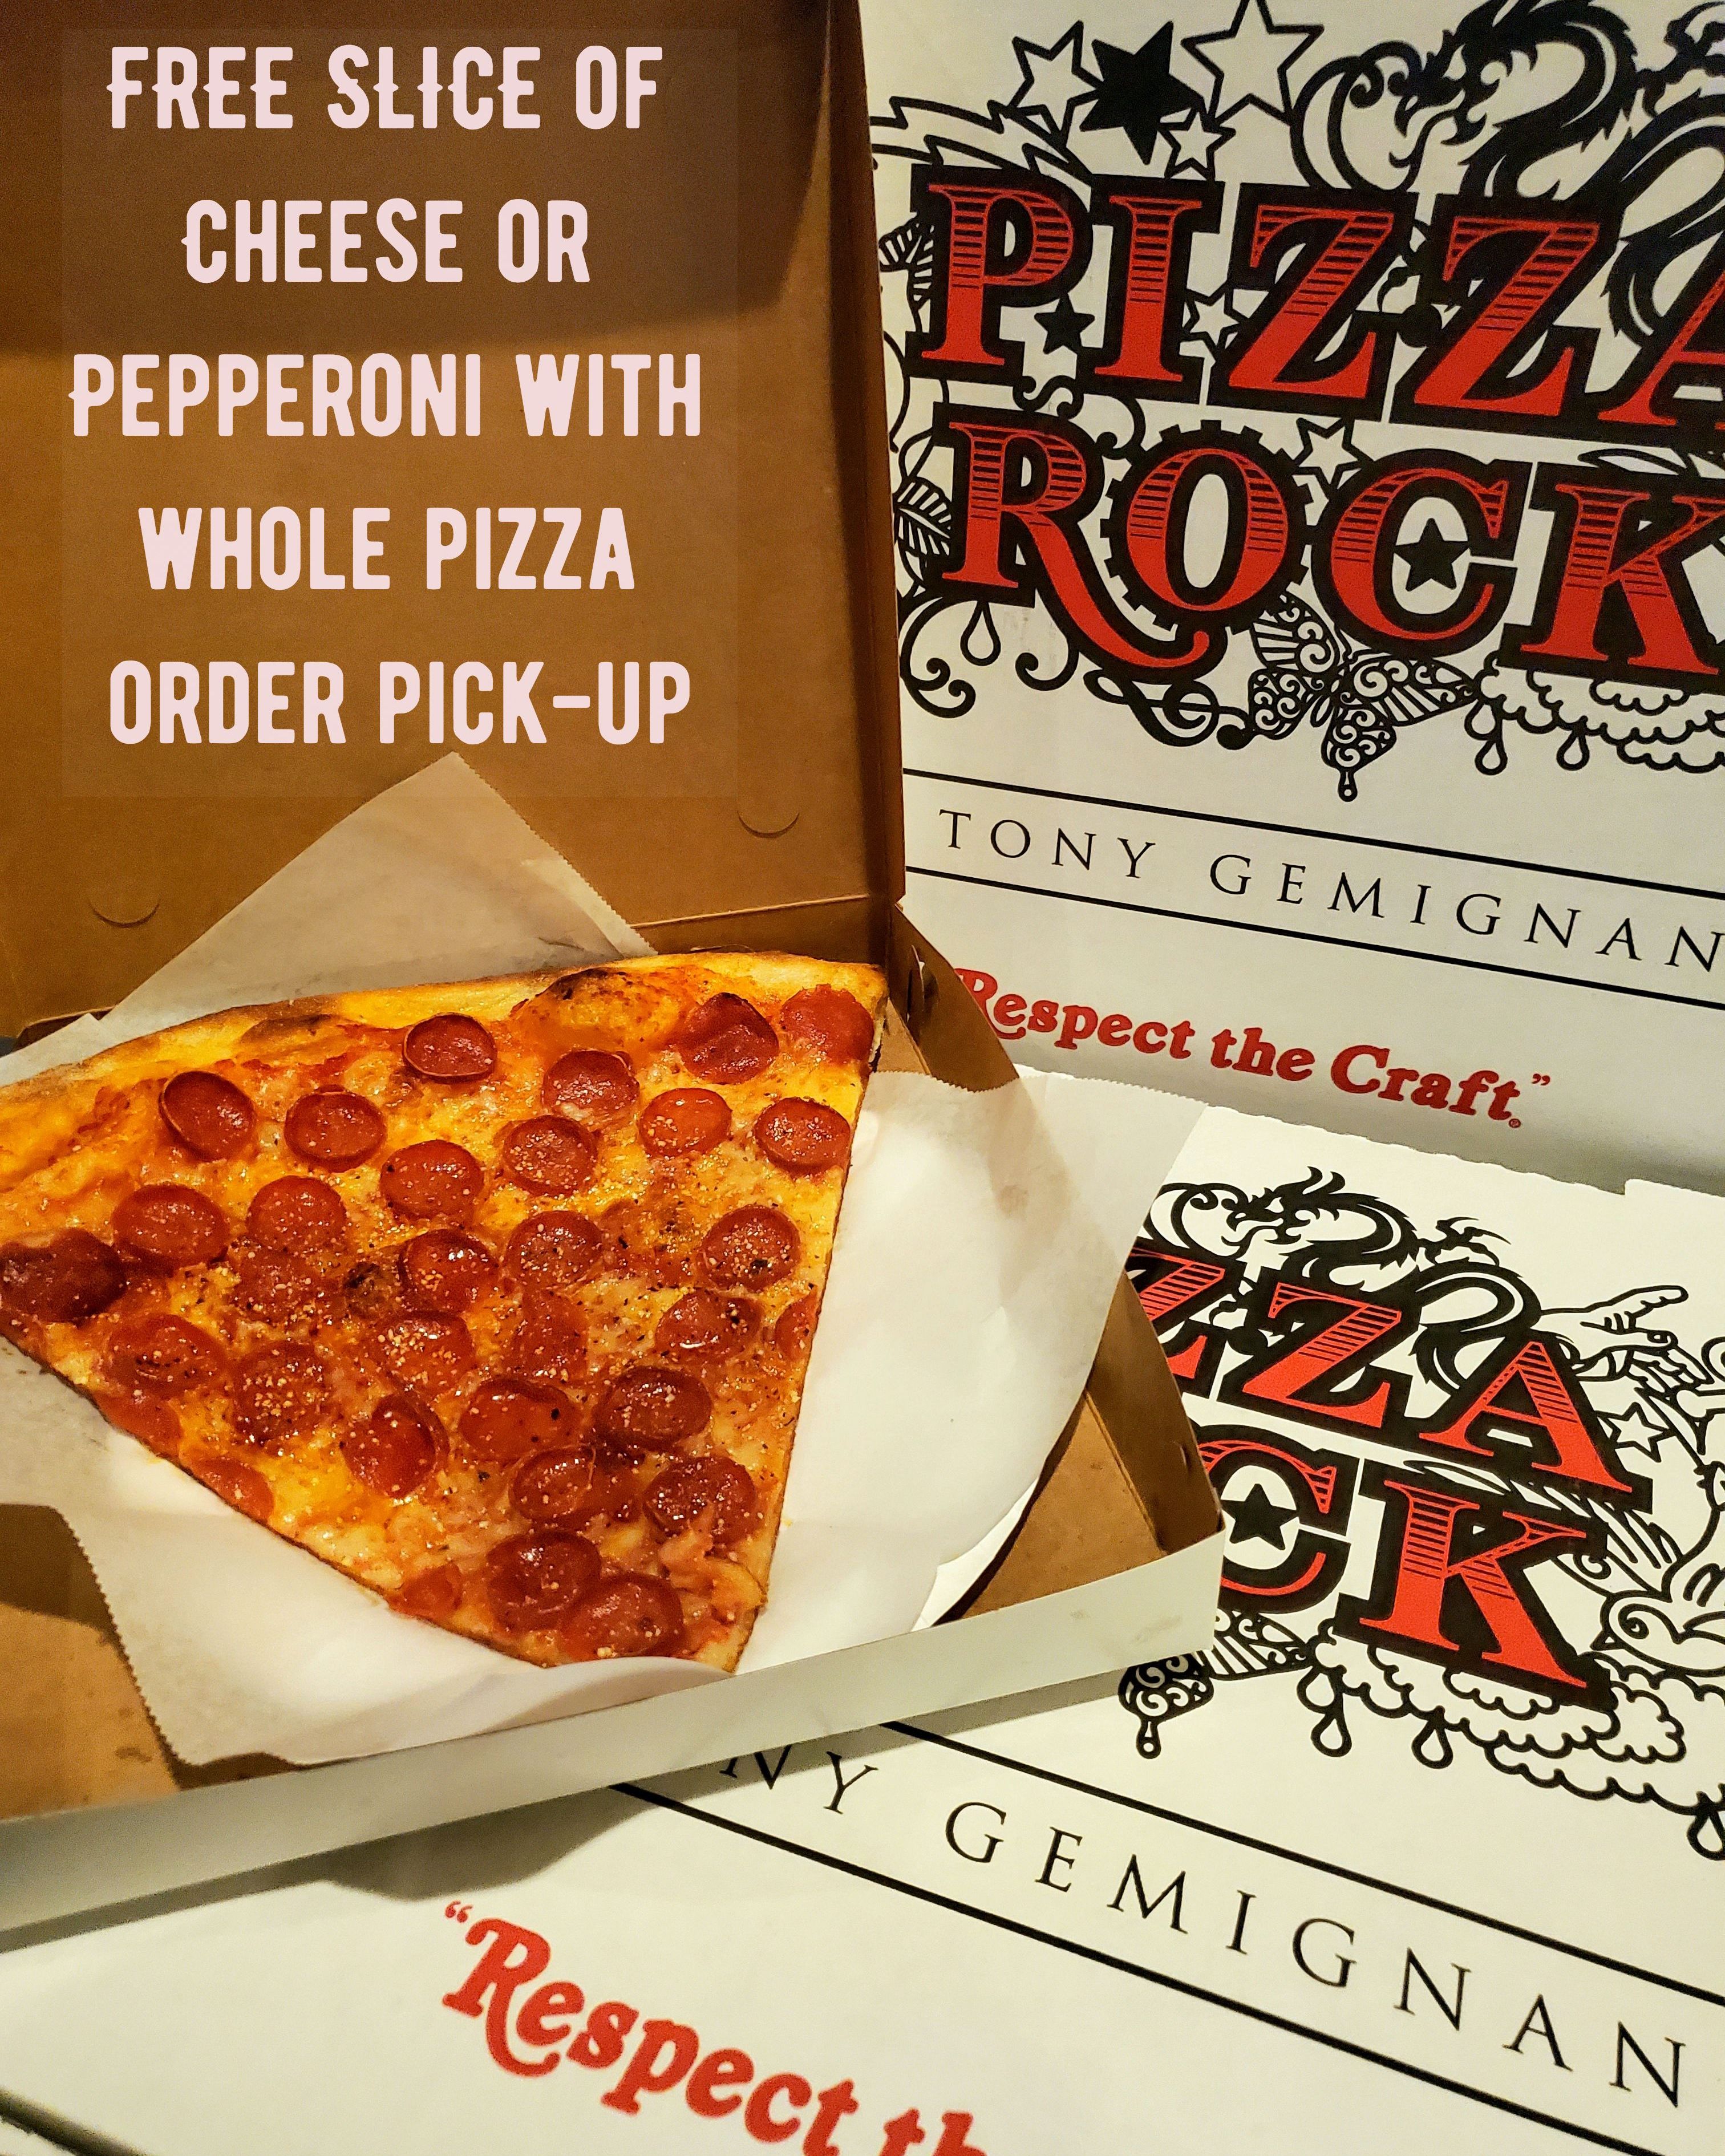 Pizza Rock Las Vegas on X: FREE SLICE FOR THE ROAD! Thats right